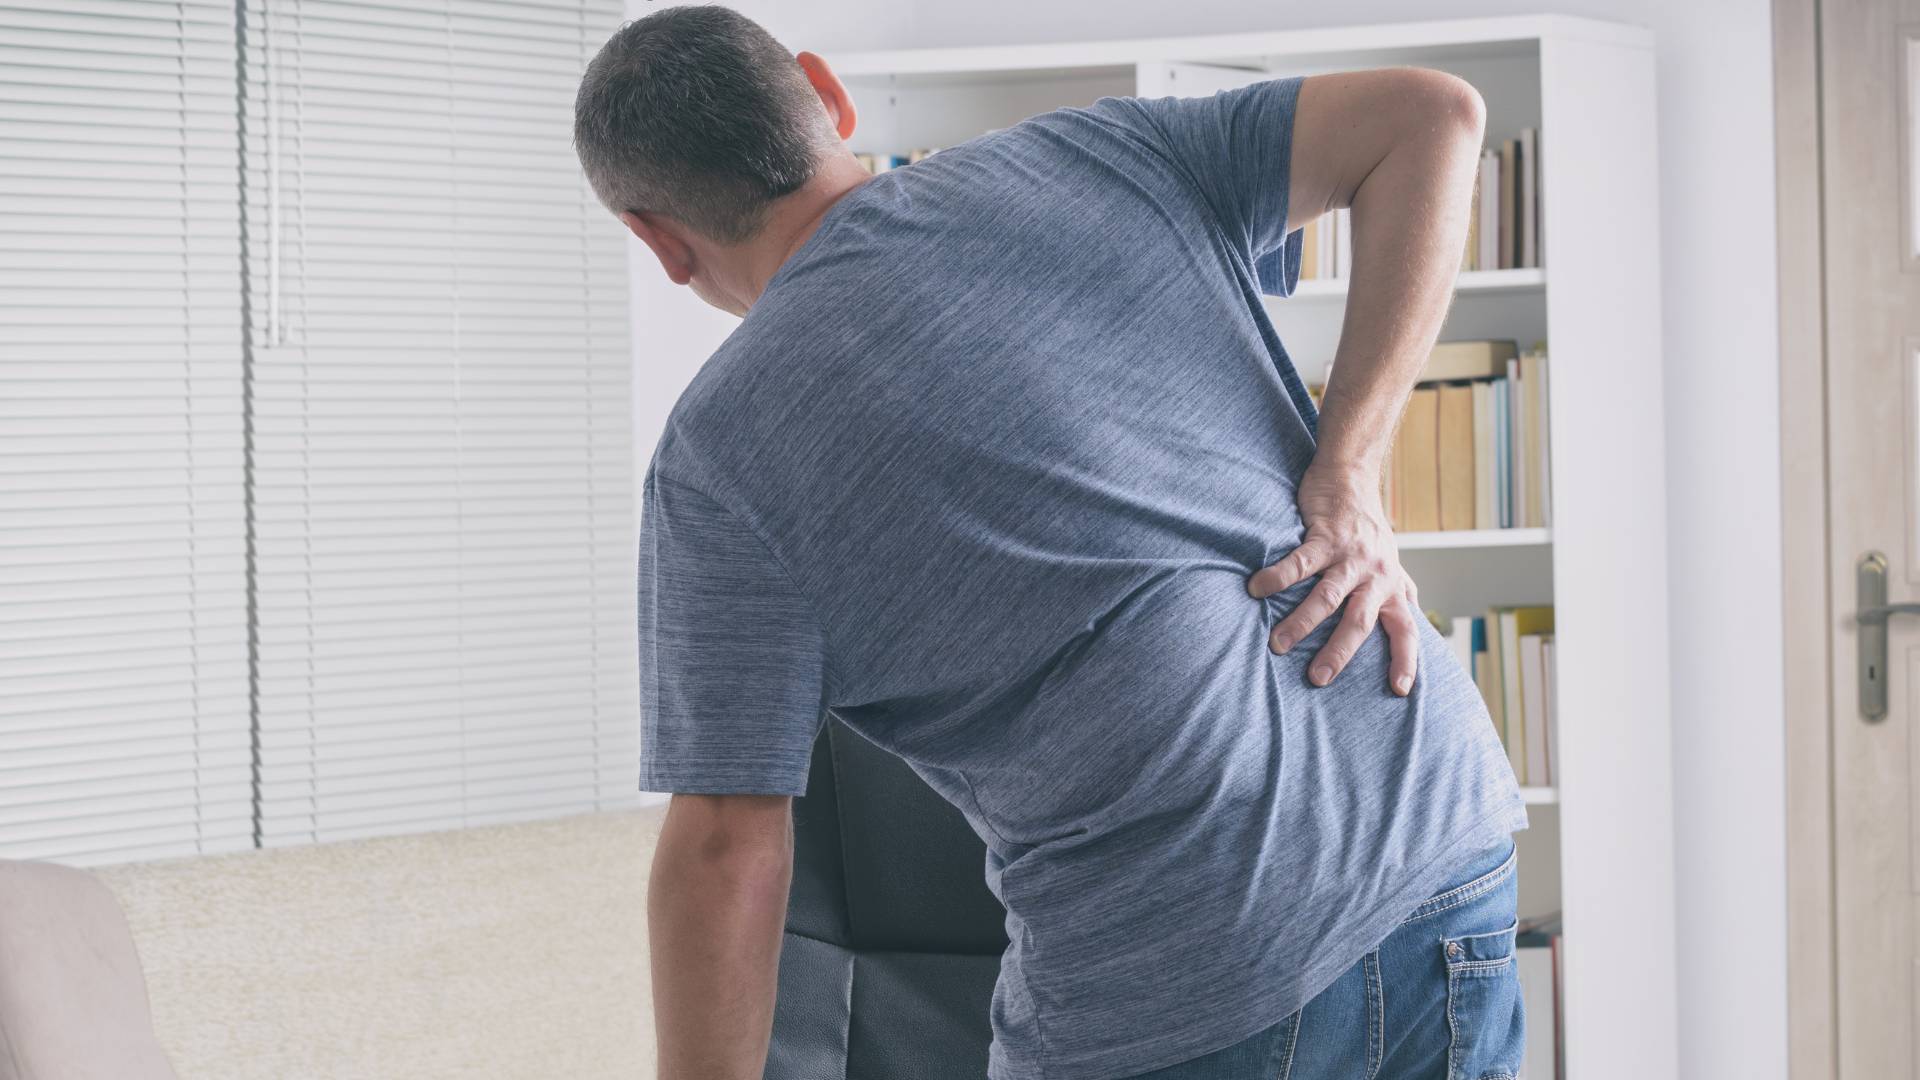 Different Kinds Of Low Back Pain And There Management